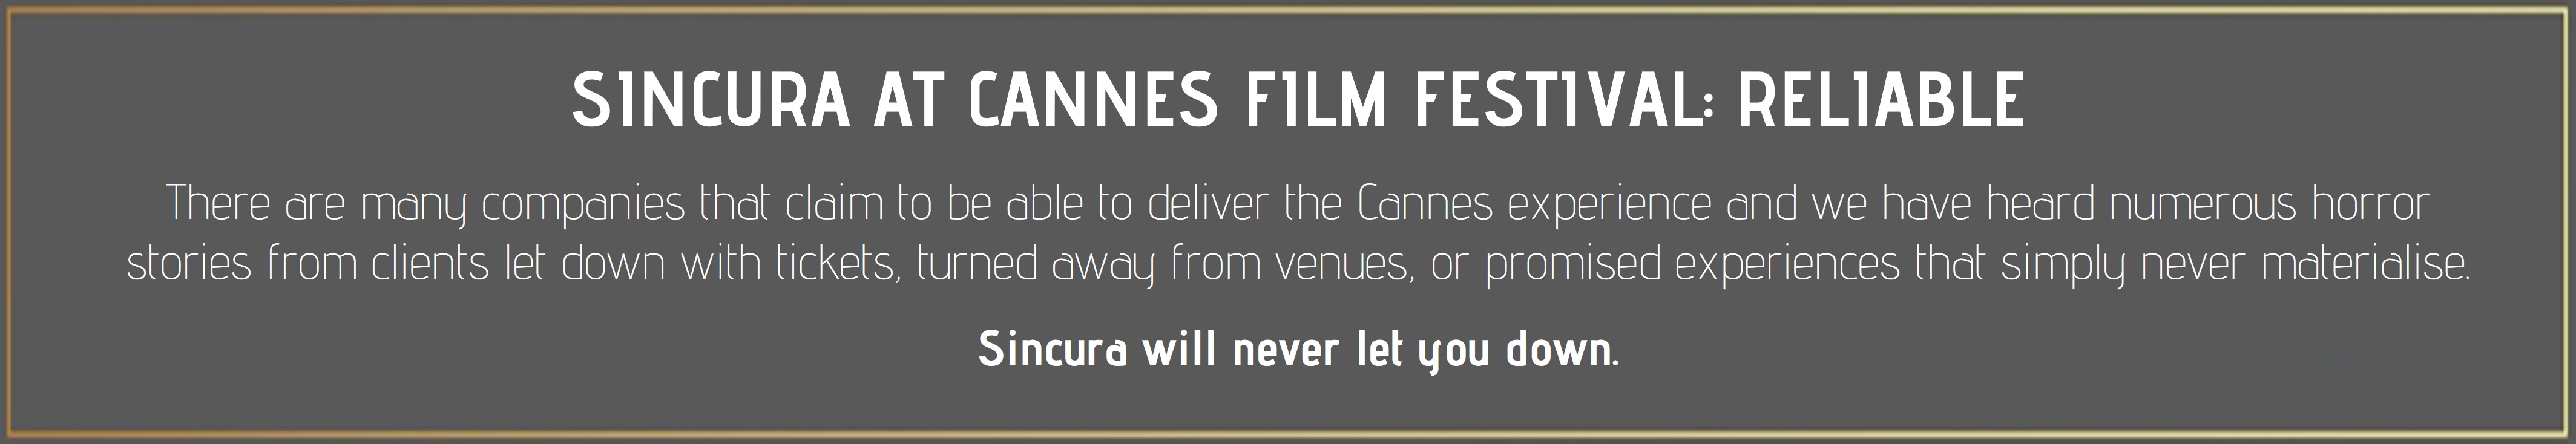 attend opening and closing afterparty at cannes film festival